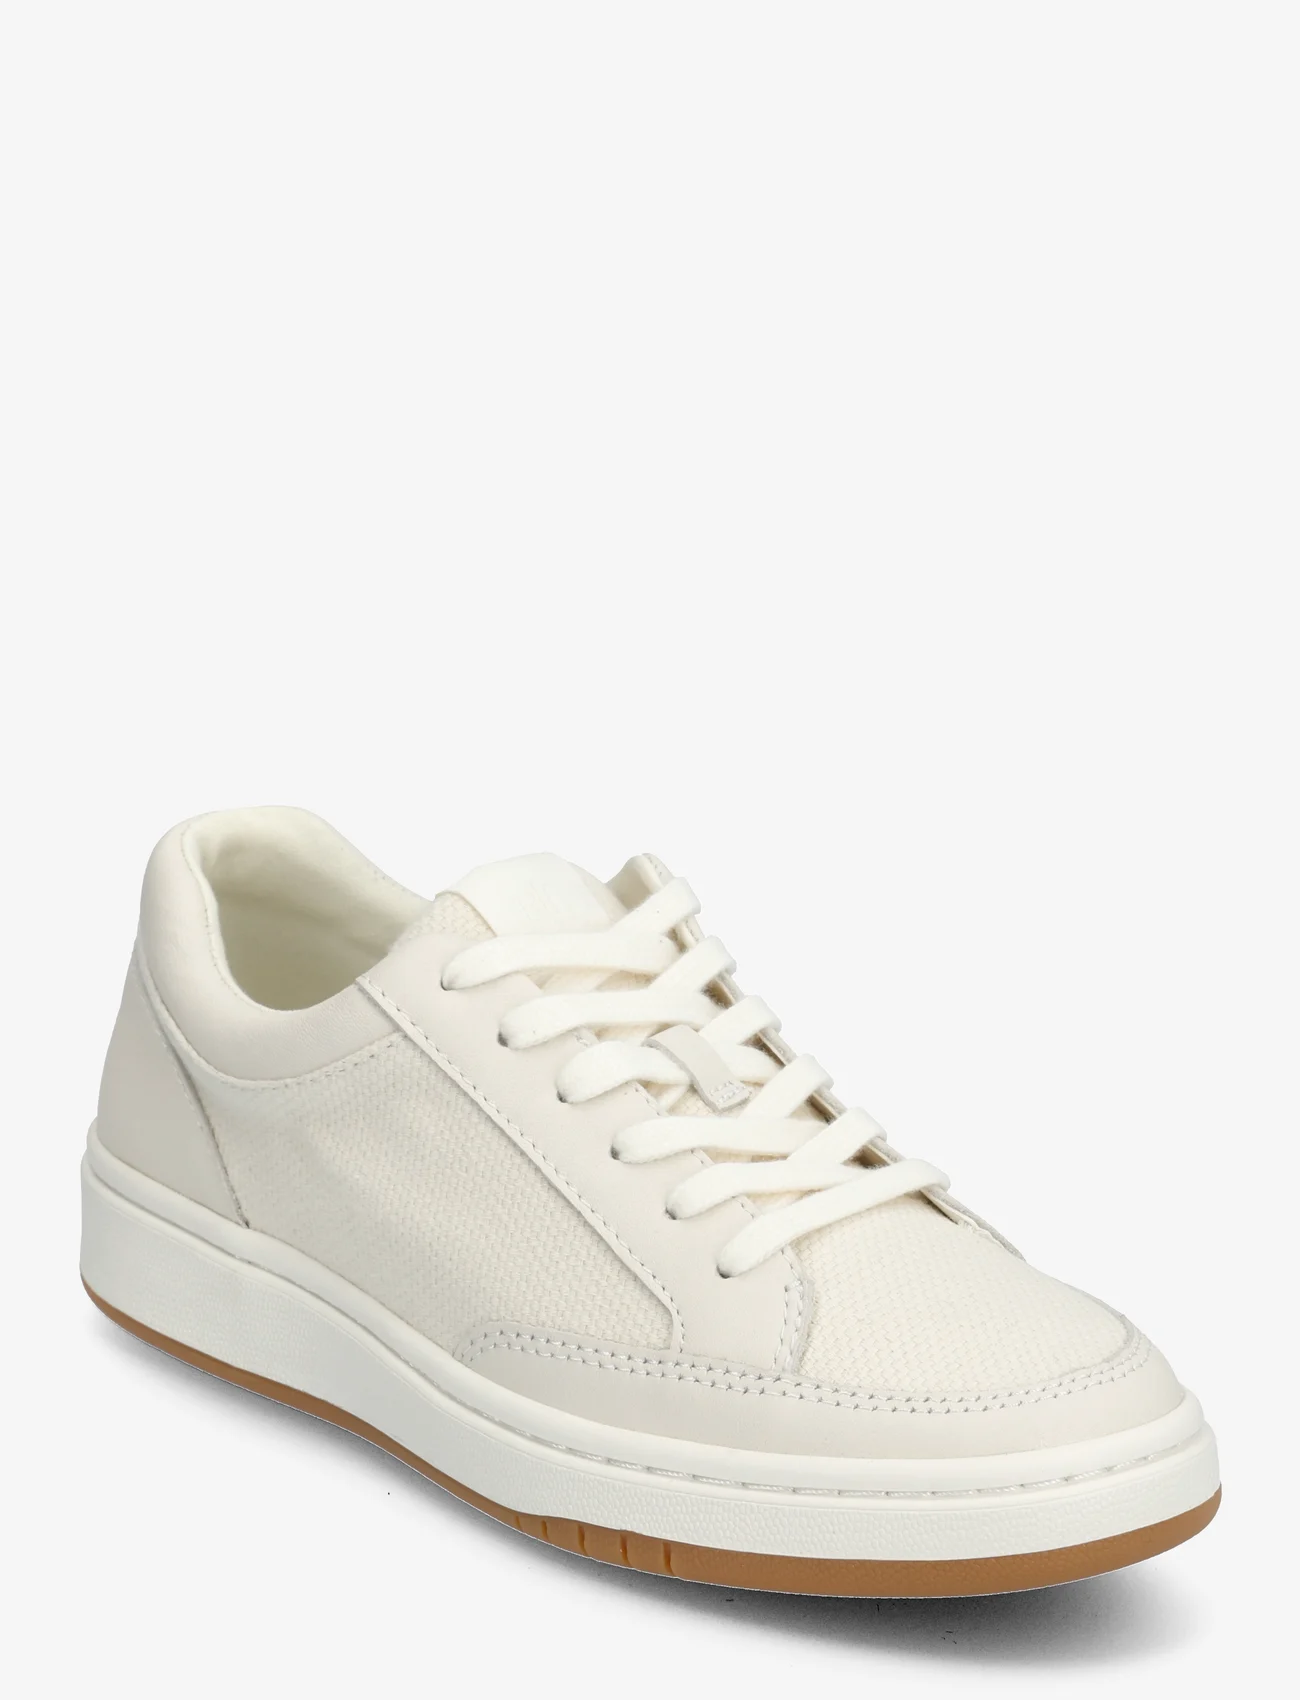 Lauren Ralph Lauren - Hailey IV Canvas & Nappa Leather Sneaker - lave sneakers - soft white/ntrl/s - 0